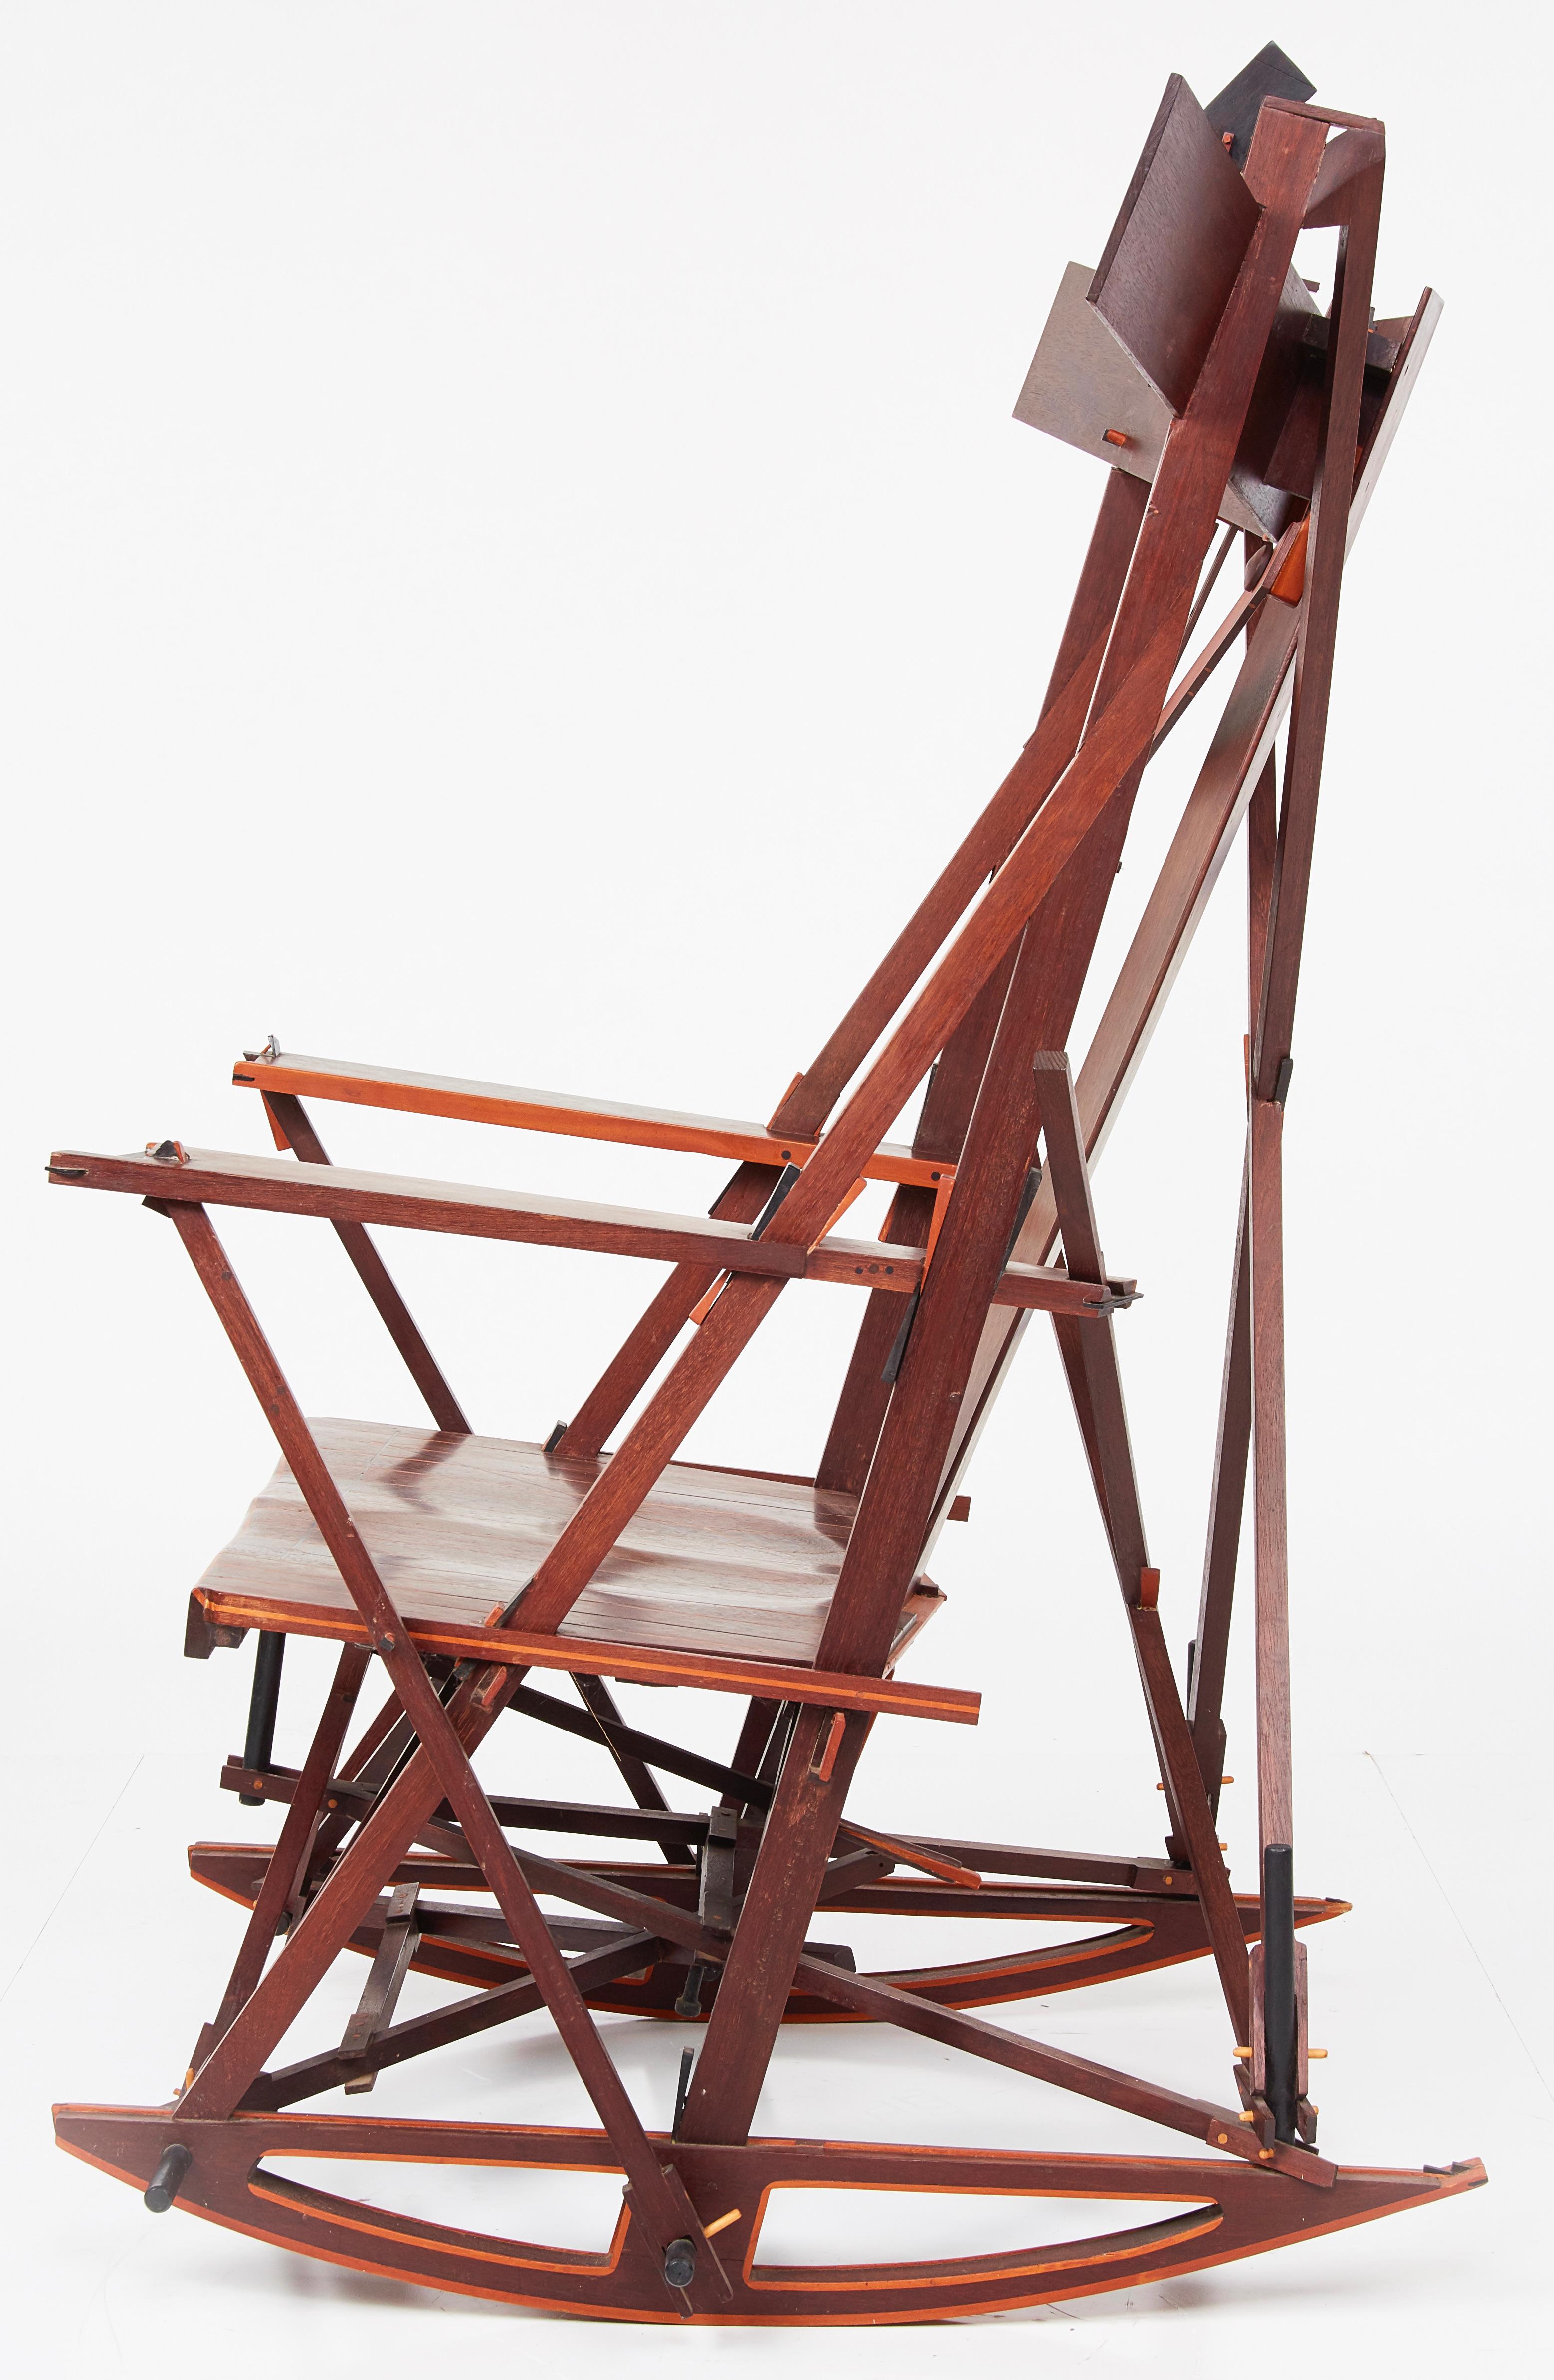 An incredible custom rocking chair by Bernie Lubell. A fantastic, maximally constructed architectural piece, chockablock with wonderful details large and small. Well built and fully functional, seemingly a study in joinery and mixed-woods lamination